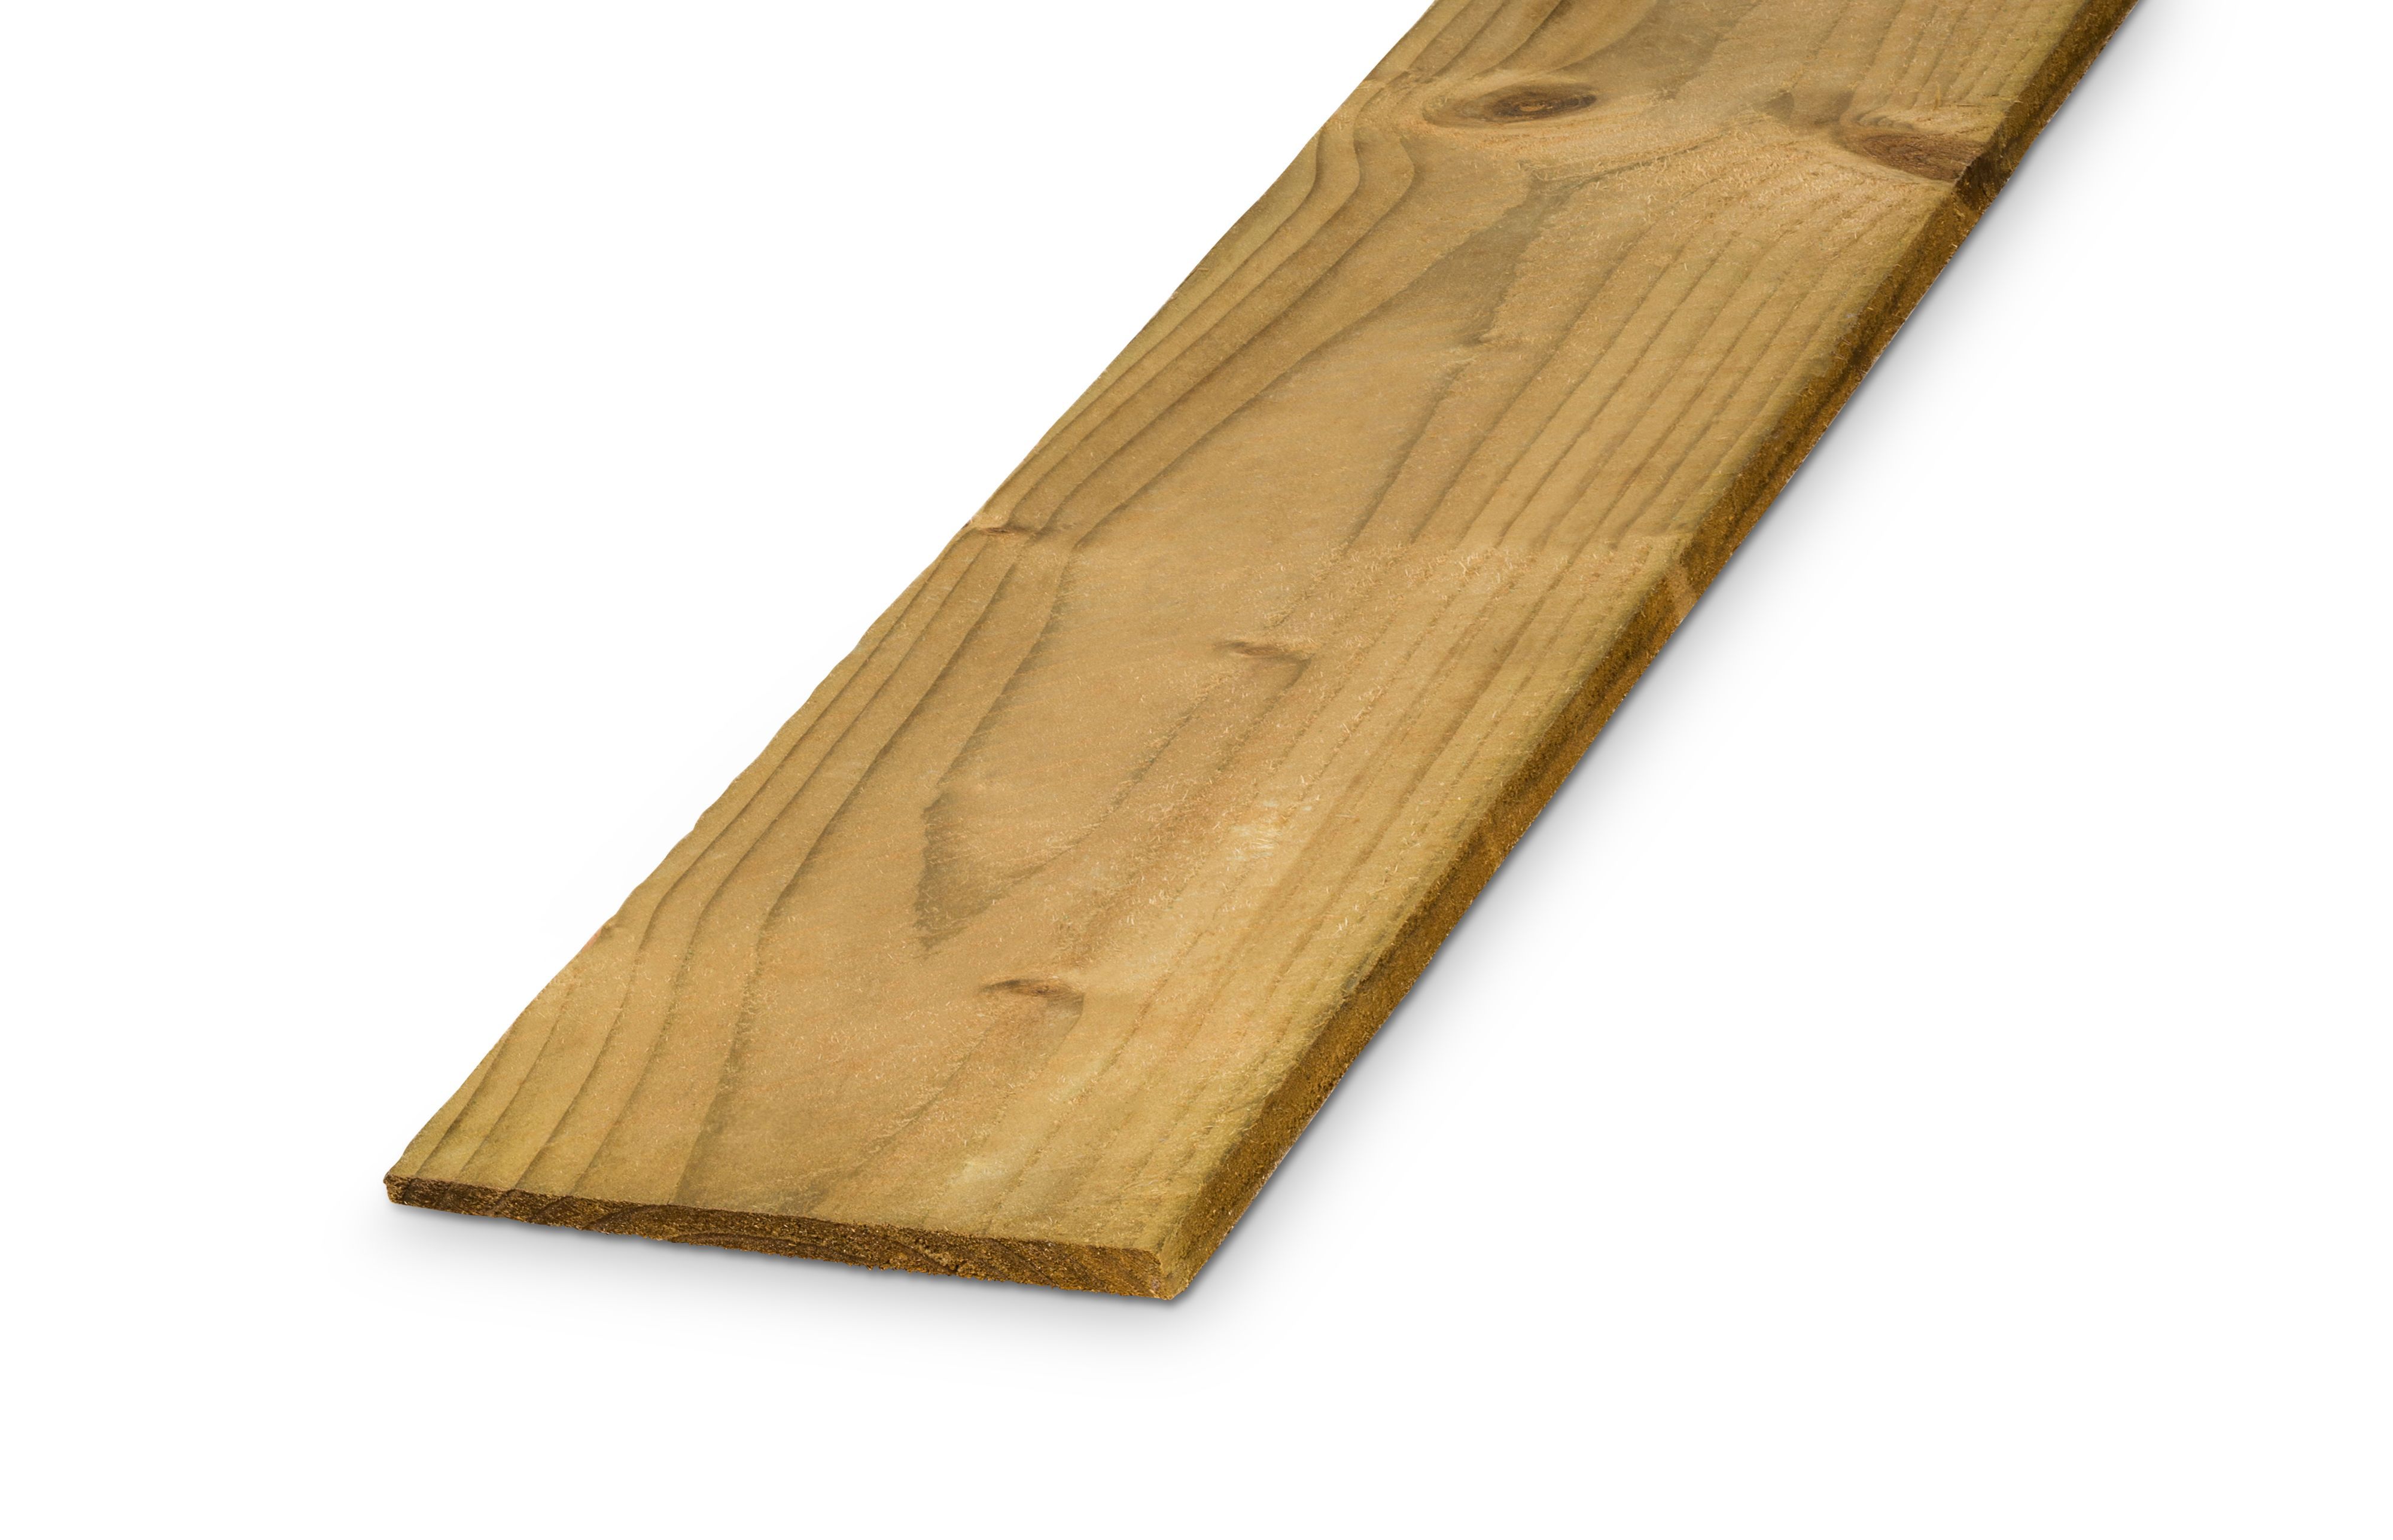 Blooma Pressure treated Timber Feather edge Fence board (L)1.8m (W)125mm (T)11mm, Pack of 8